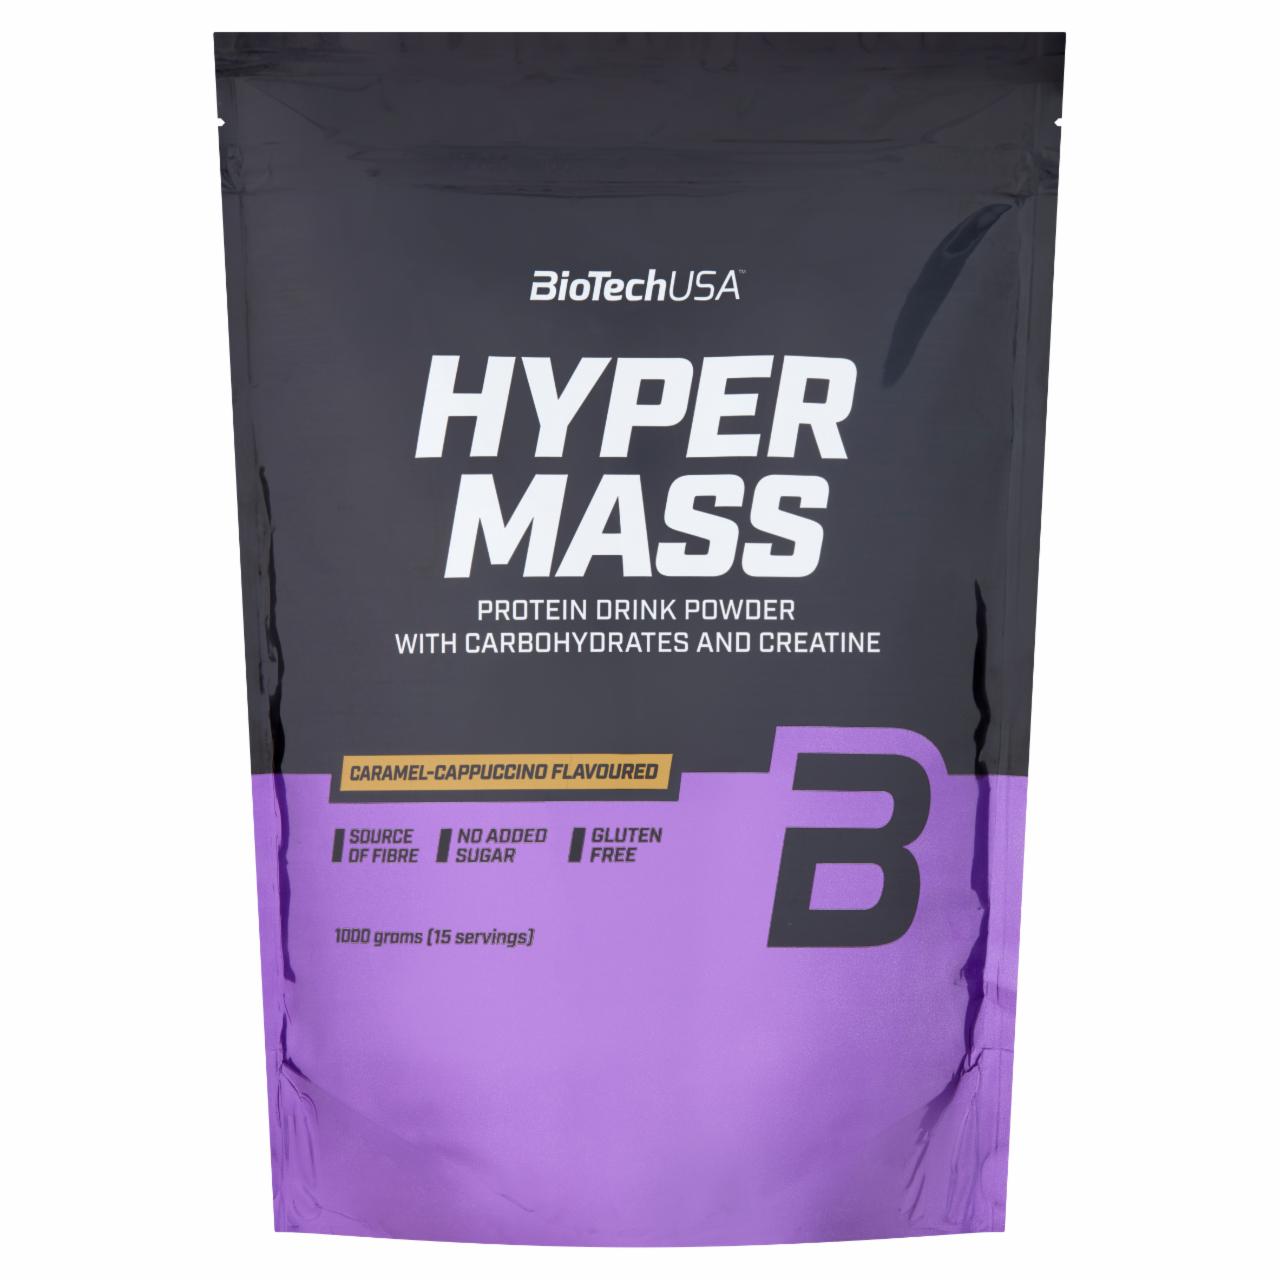 Fotografie - Hyper Mass Caramel-Cappuccino Protein Drink Powder with Carbohydrates and Creatine BioTechUSA